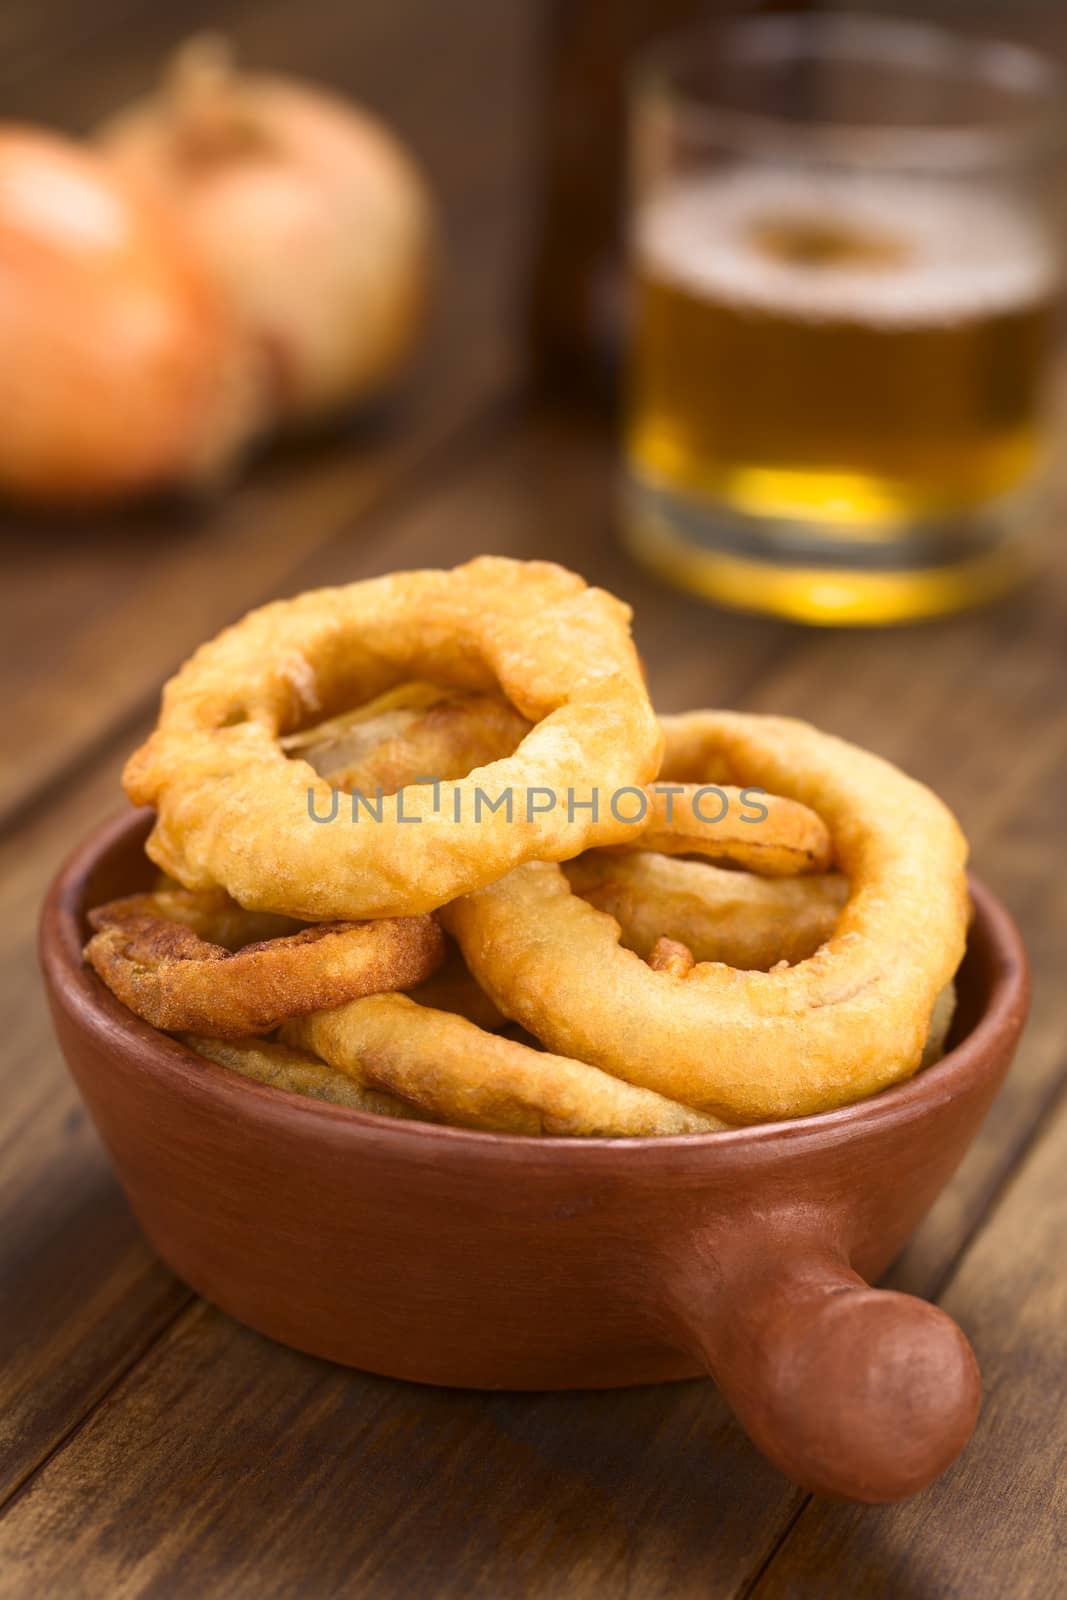 Beer-Battered Onion Rings by ildi